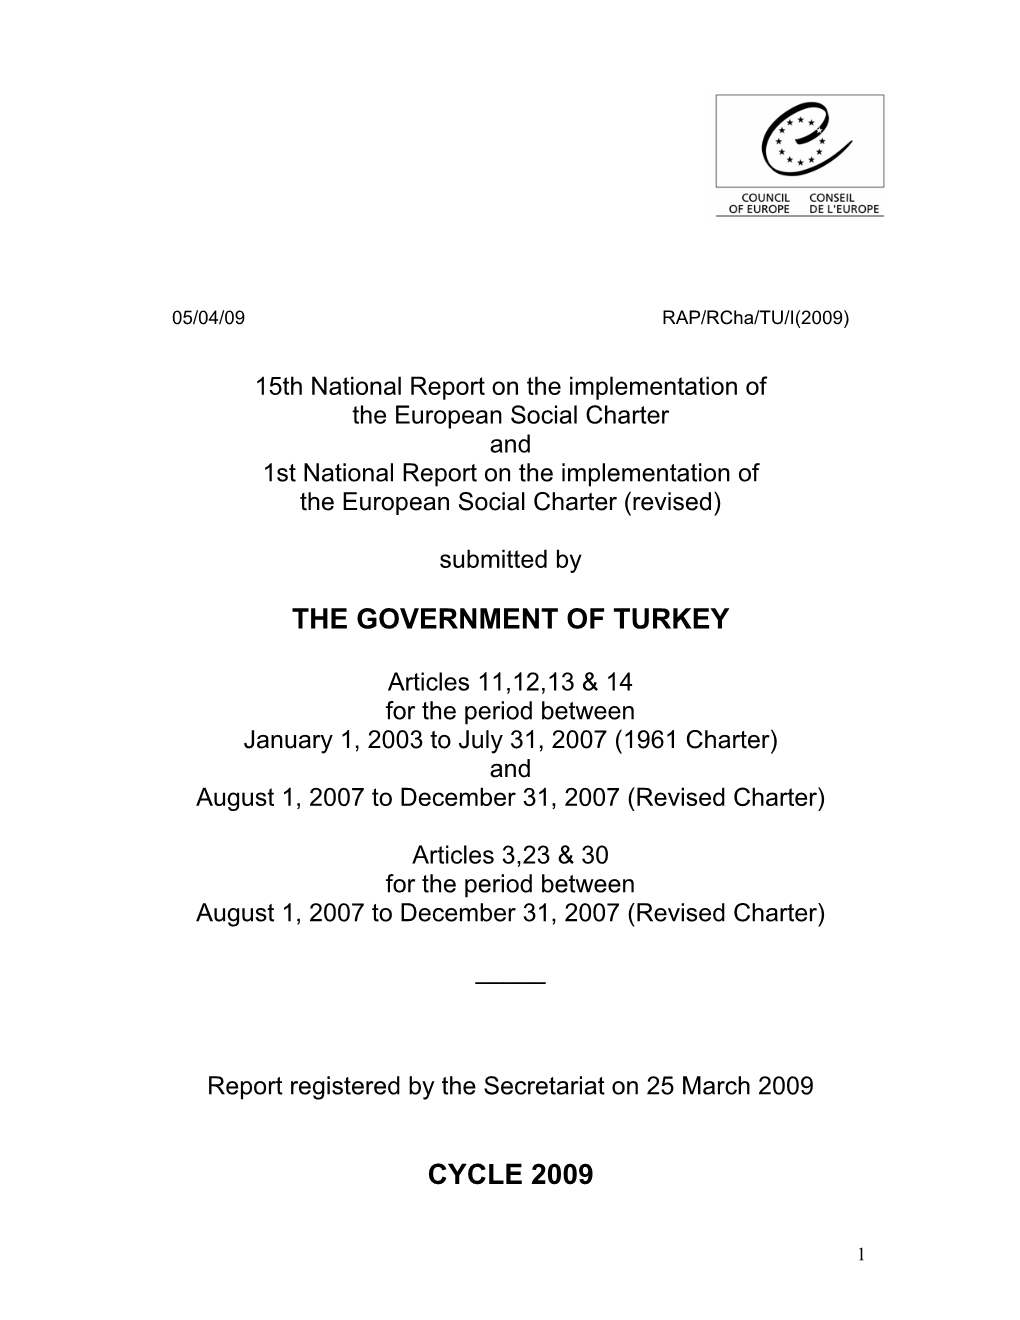 The Government of Turkey Cycle 2009